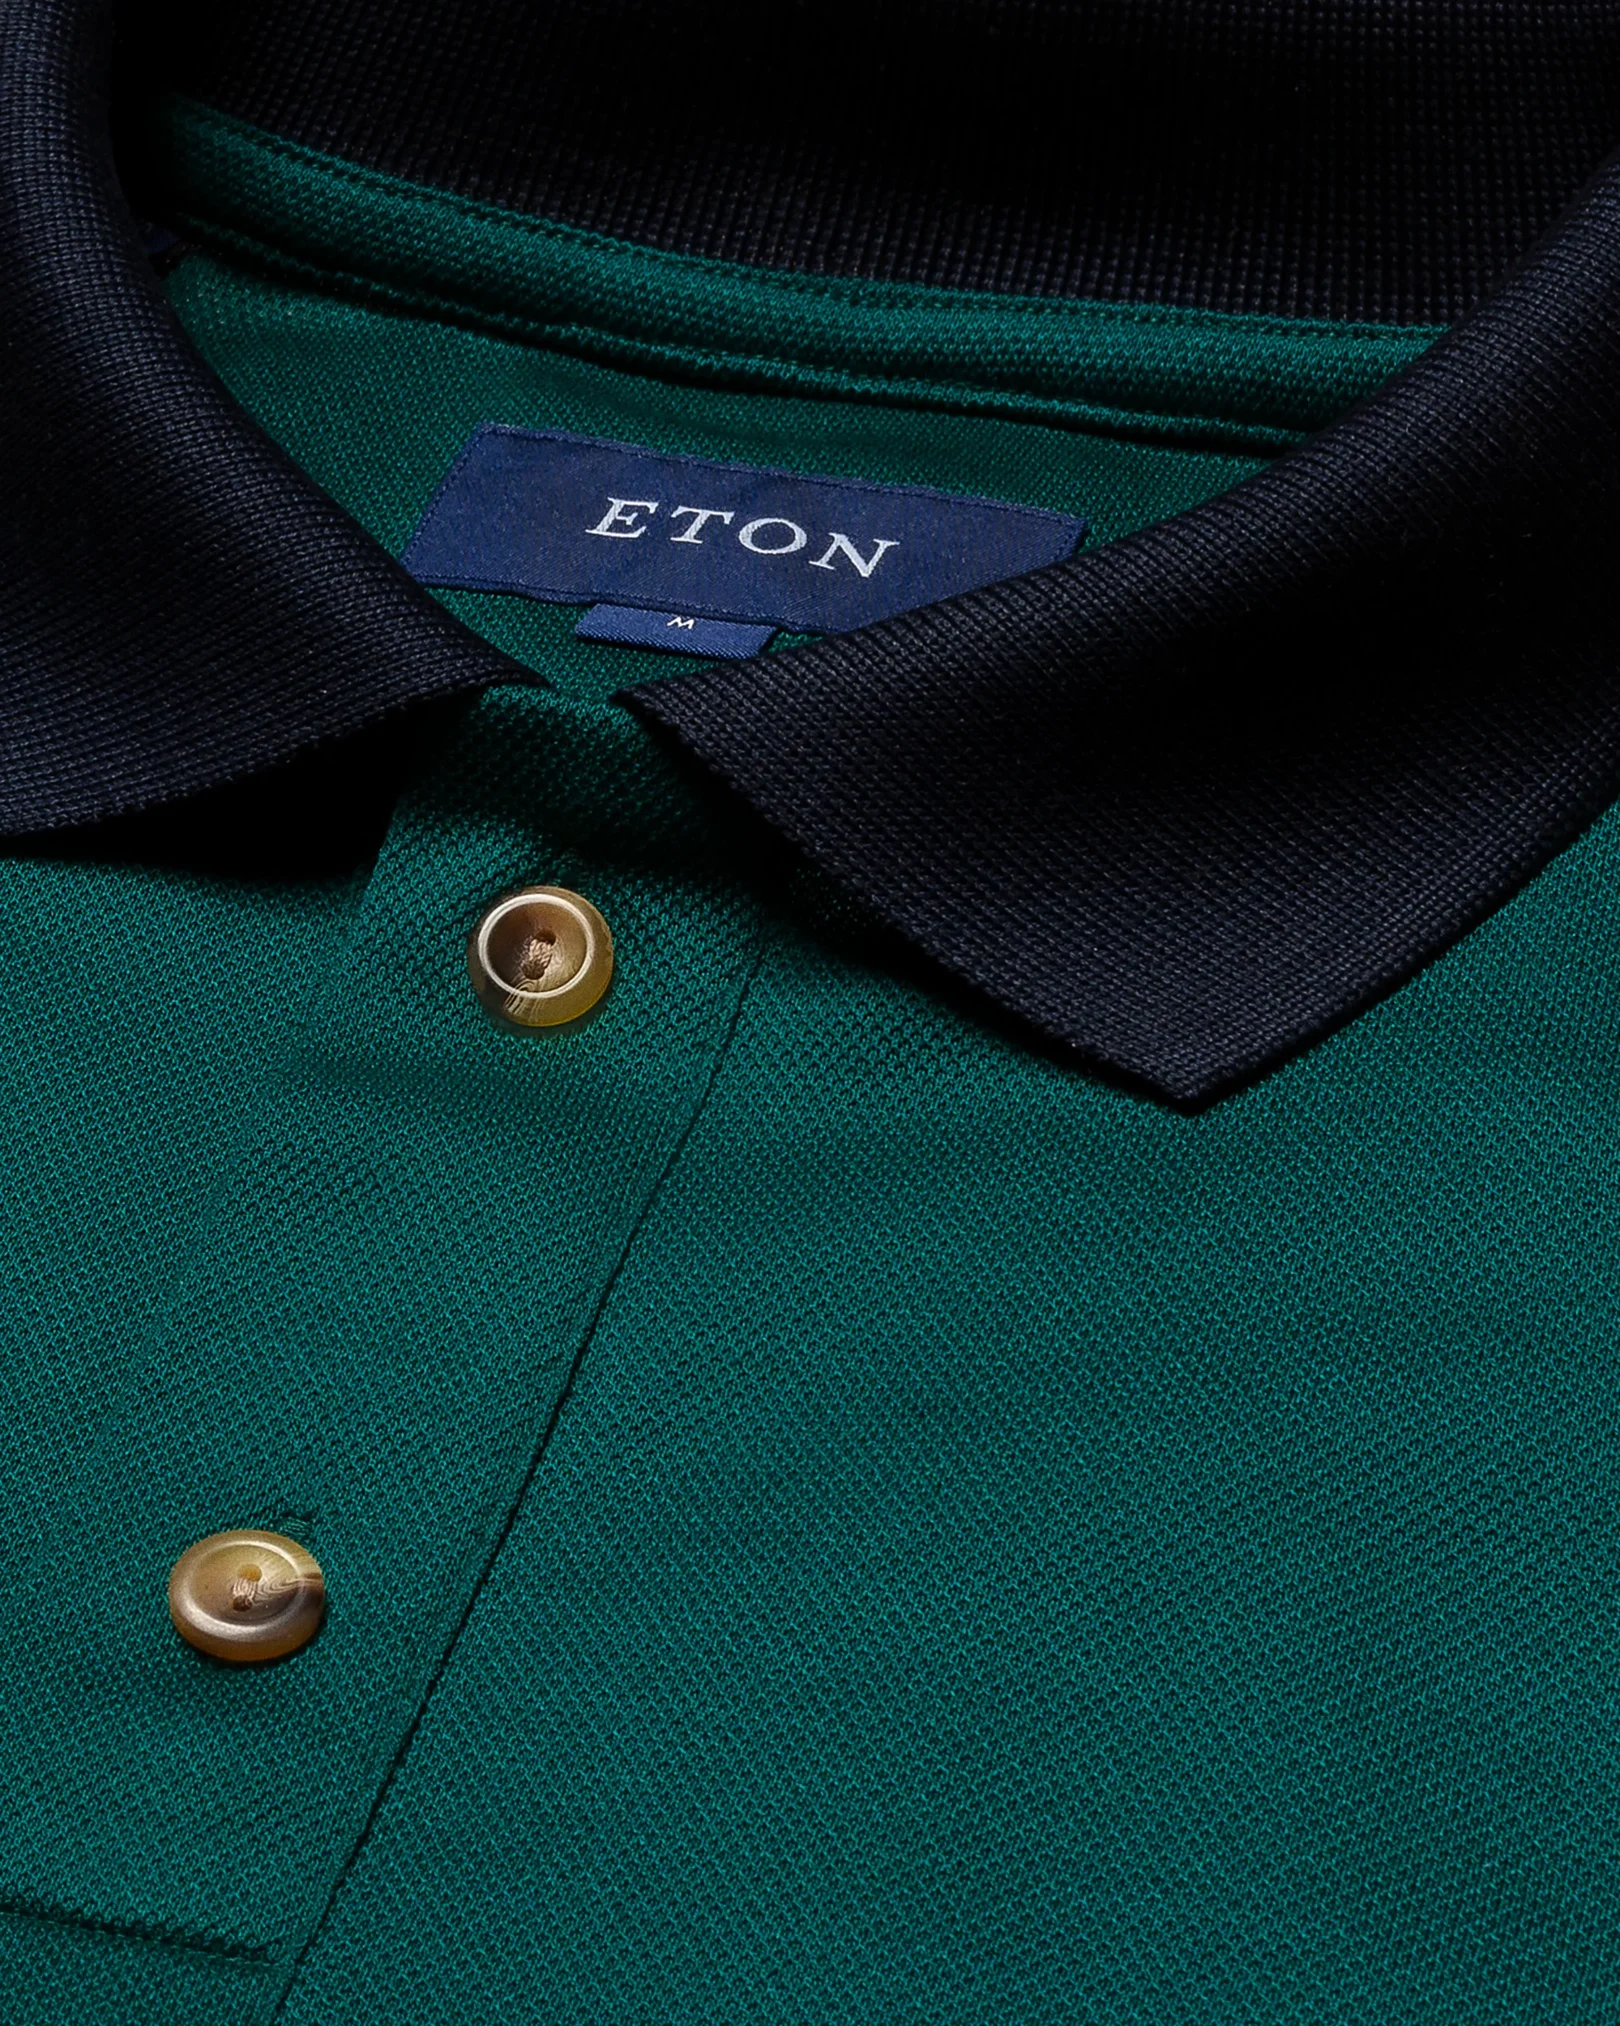 Eton - mid green knit pique knitted jersey